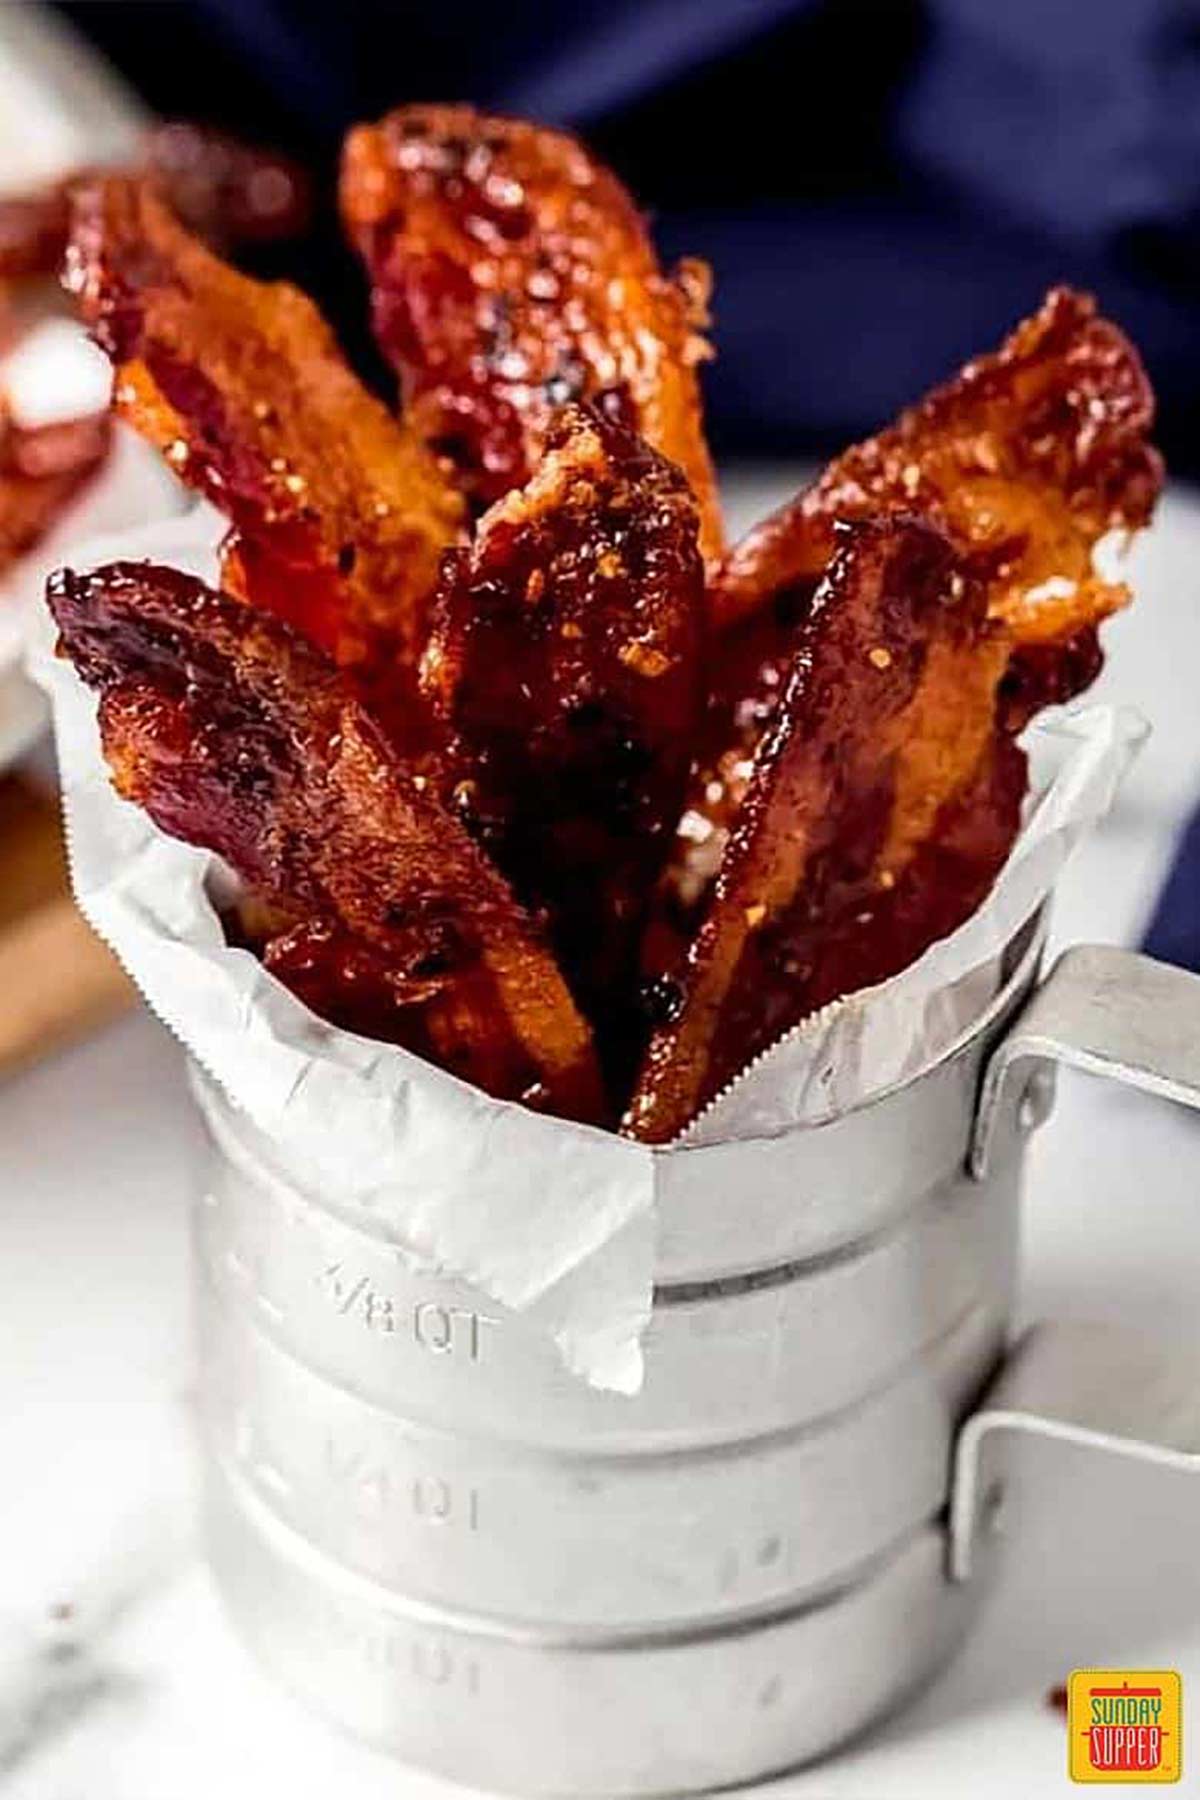 Candied bacon in a metal cup